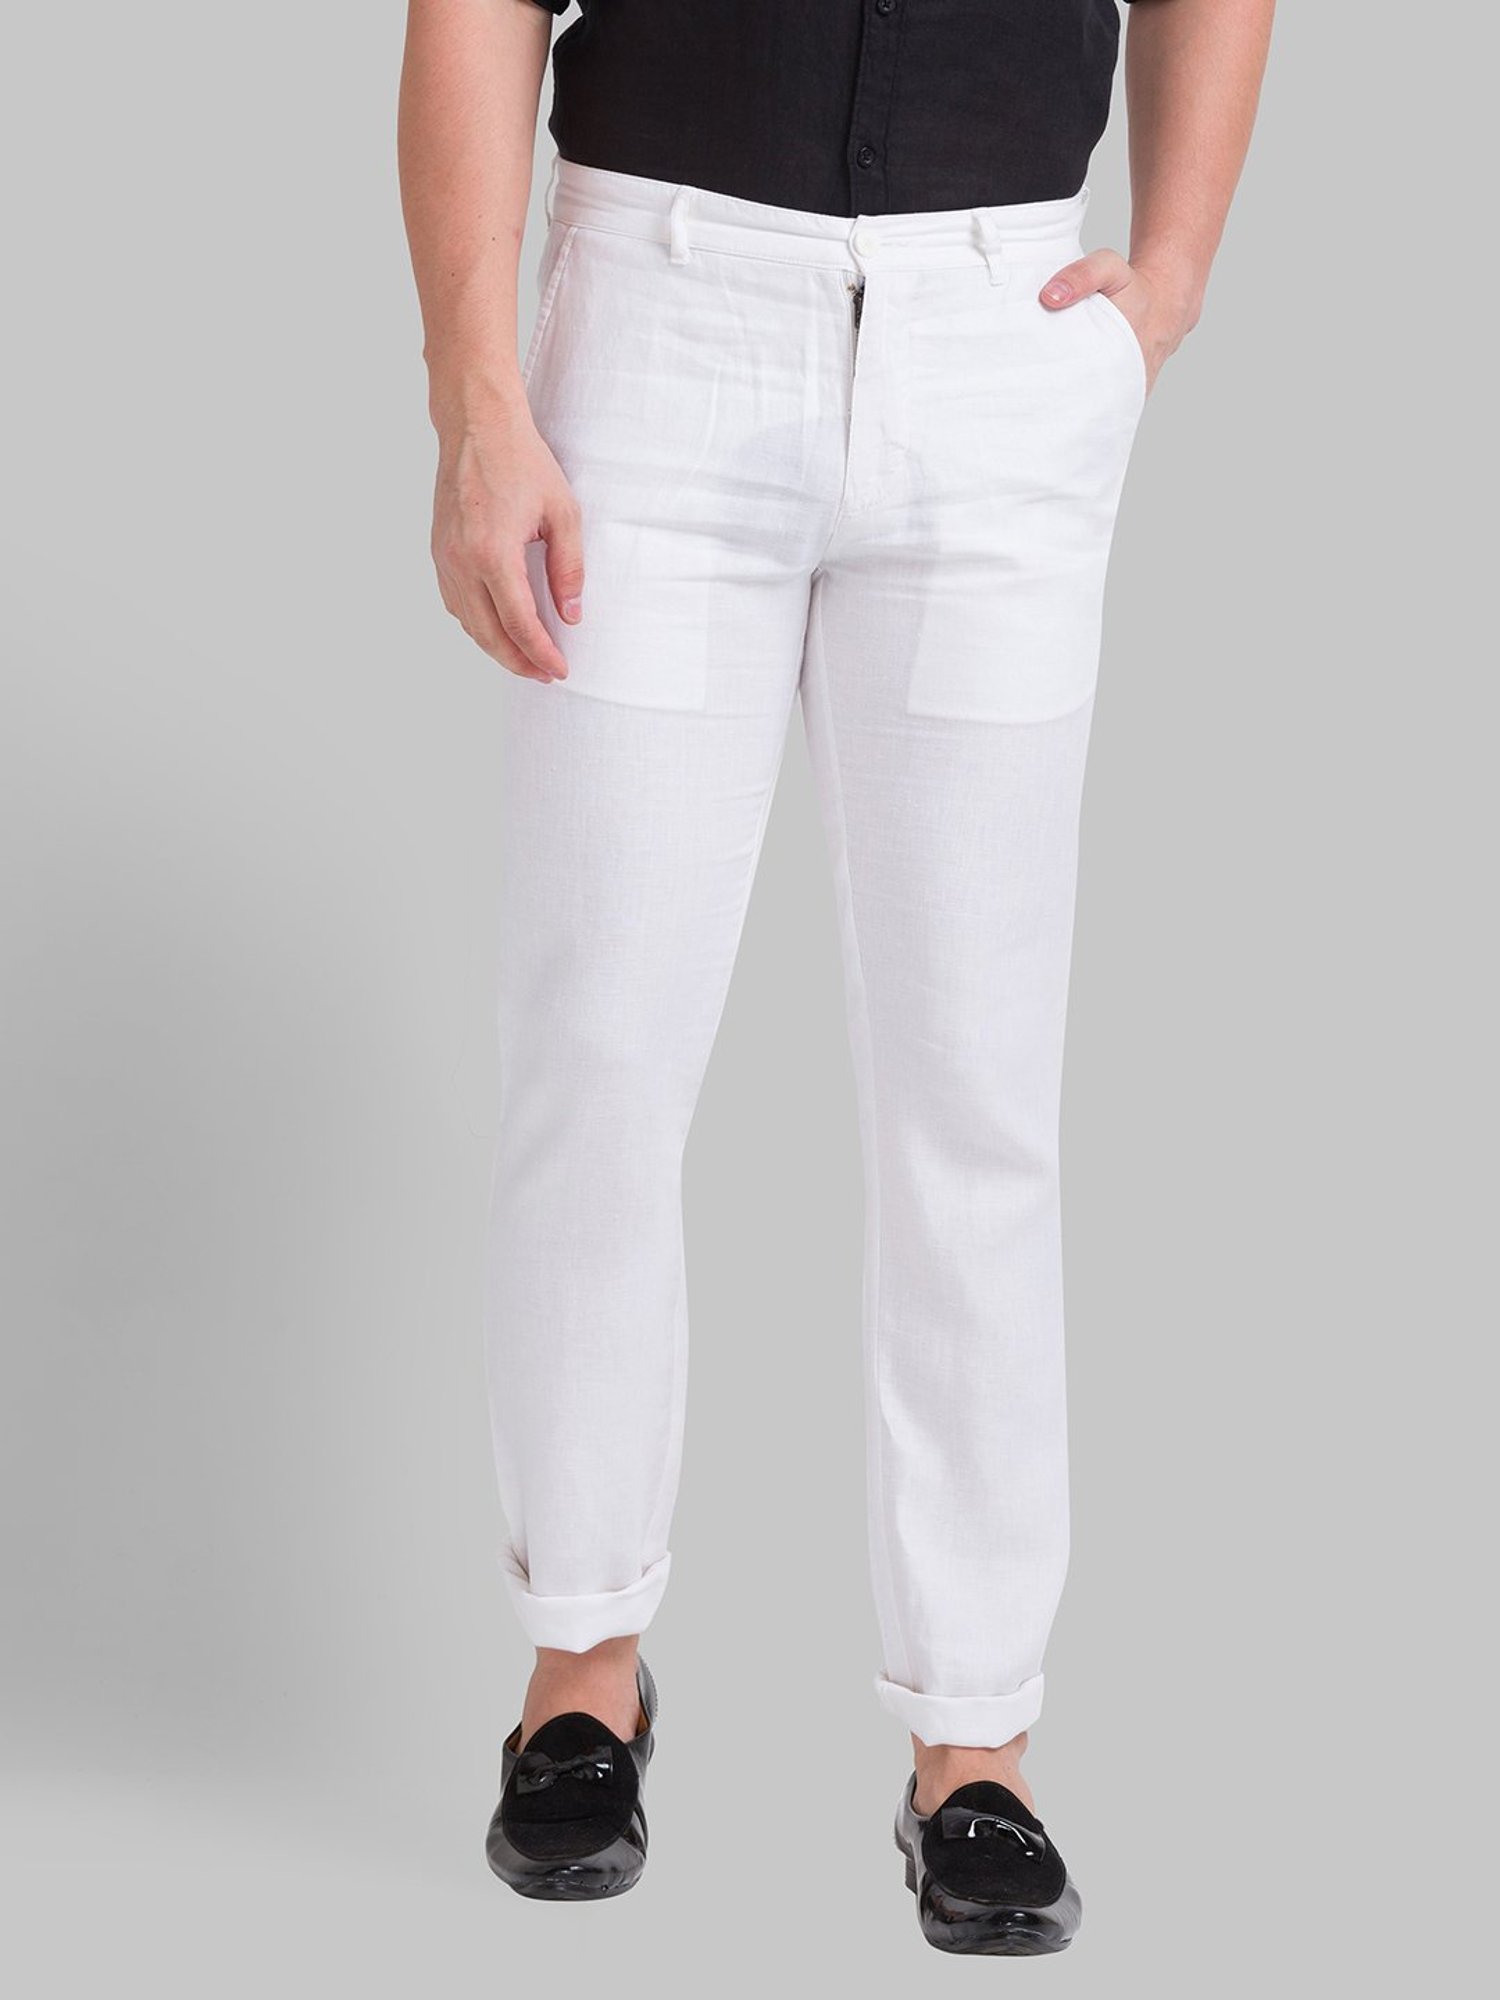 Cotton Solid Off White Pant For Women  Shopaholics